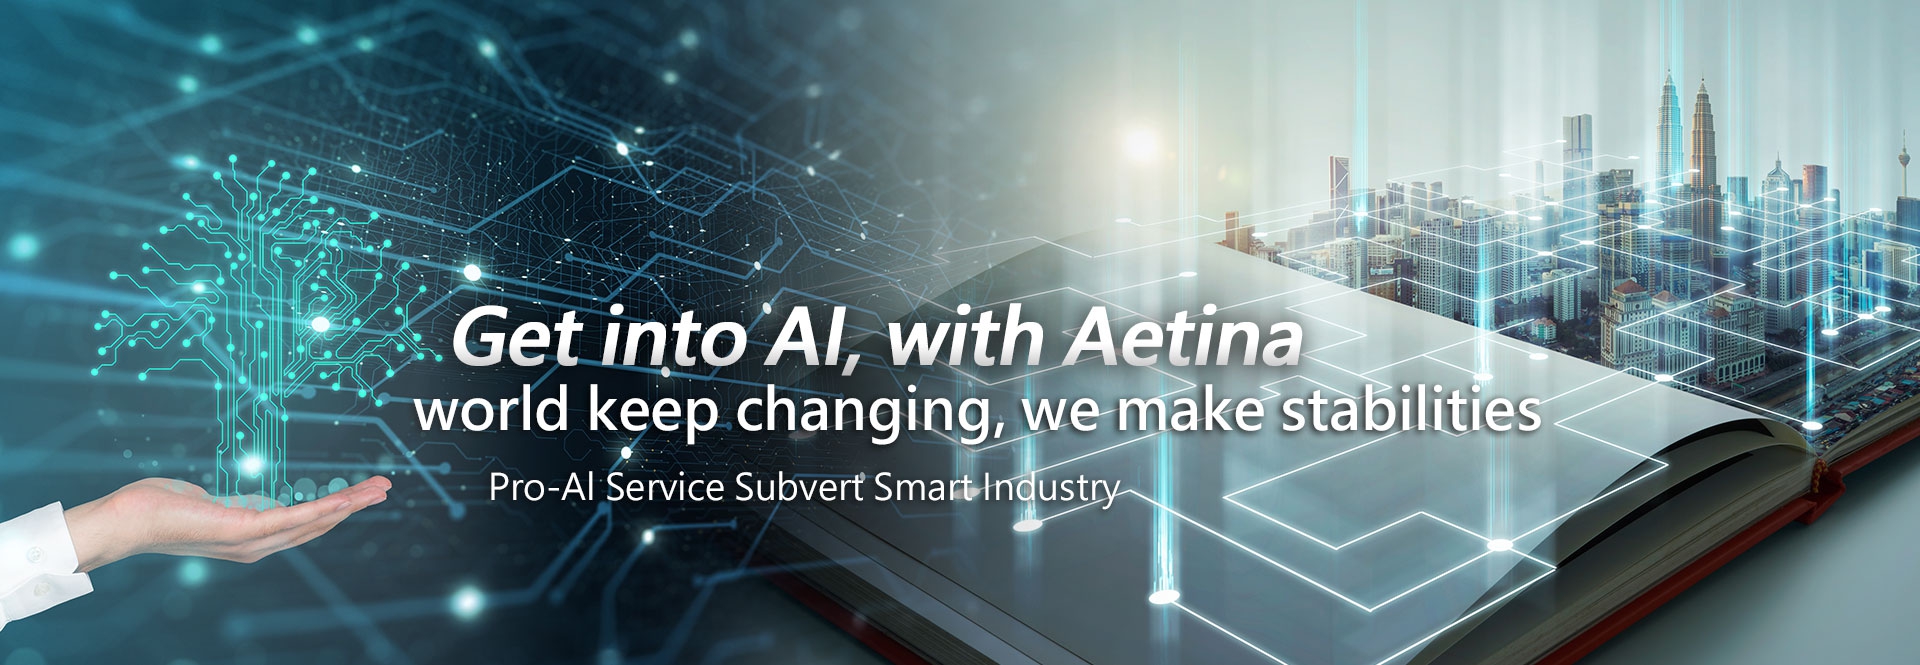 Aetina Introduce Comprehensive Pro-AI Service, Heading Toward a Smarter AIoT. The Aetina Intelligent Management (AIM) brings professional set for intelligent access through the platform, framework, app, and cloud.